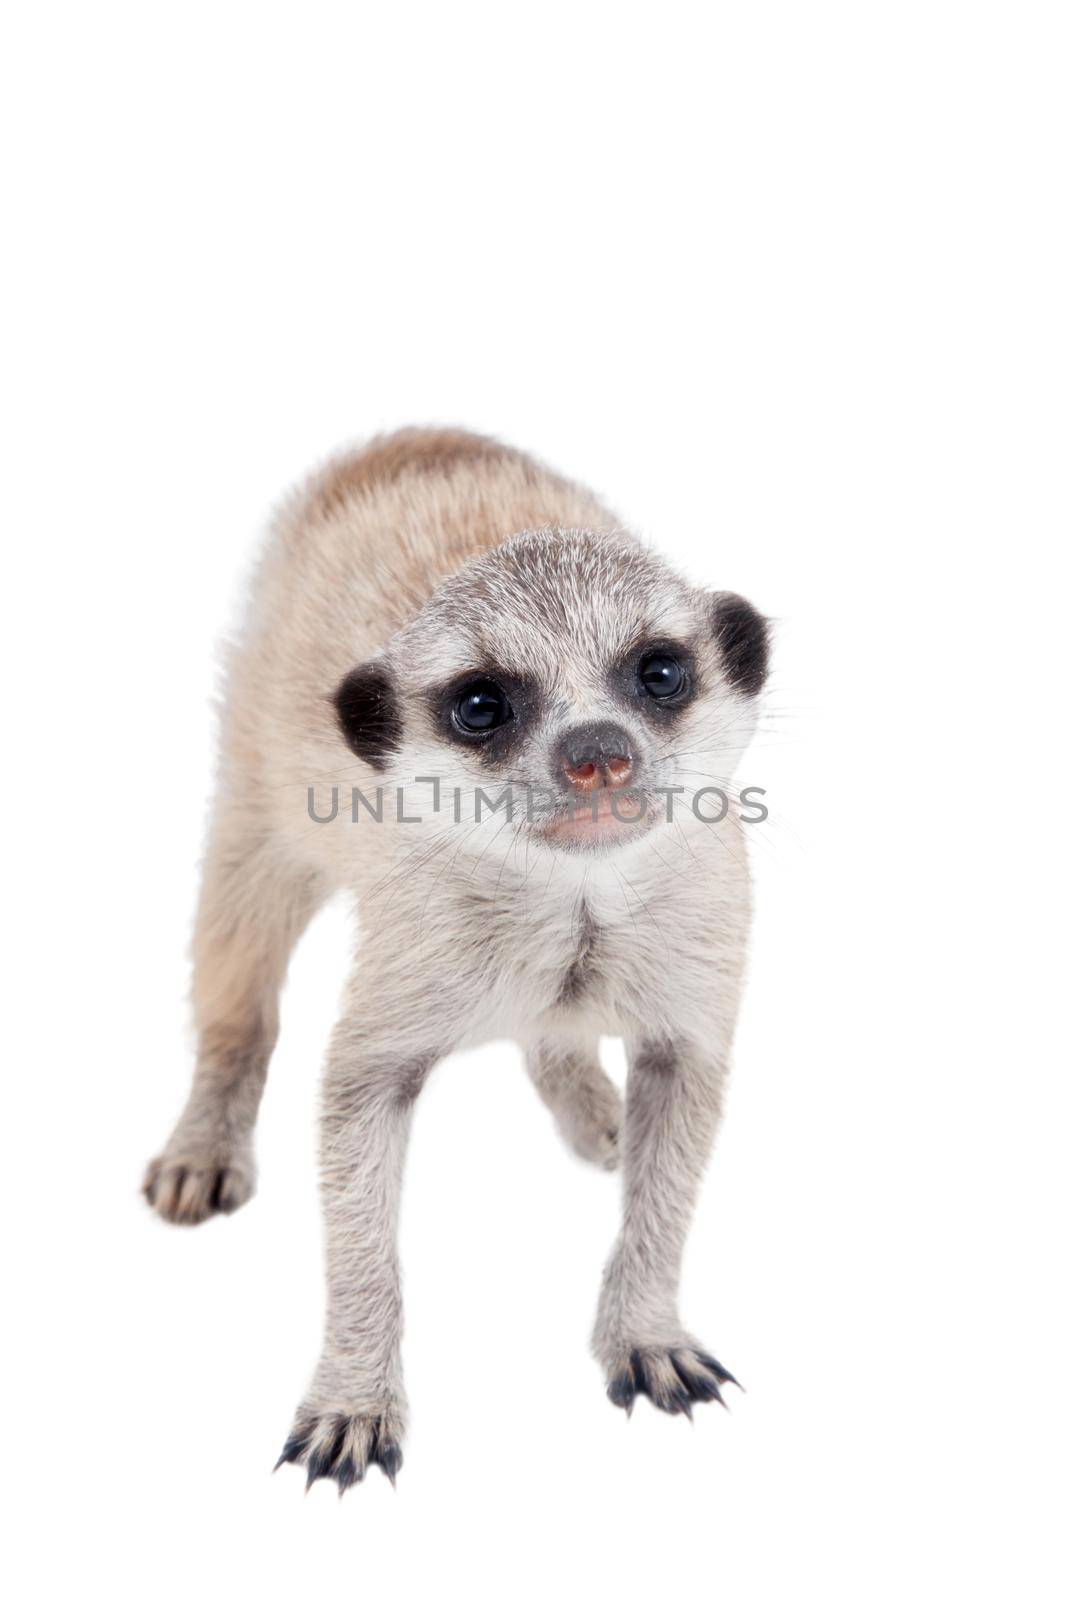 The meerkat or suricate cub, 2 month old, on white by RosaJay